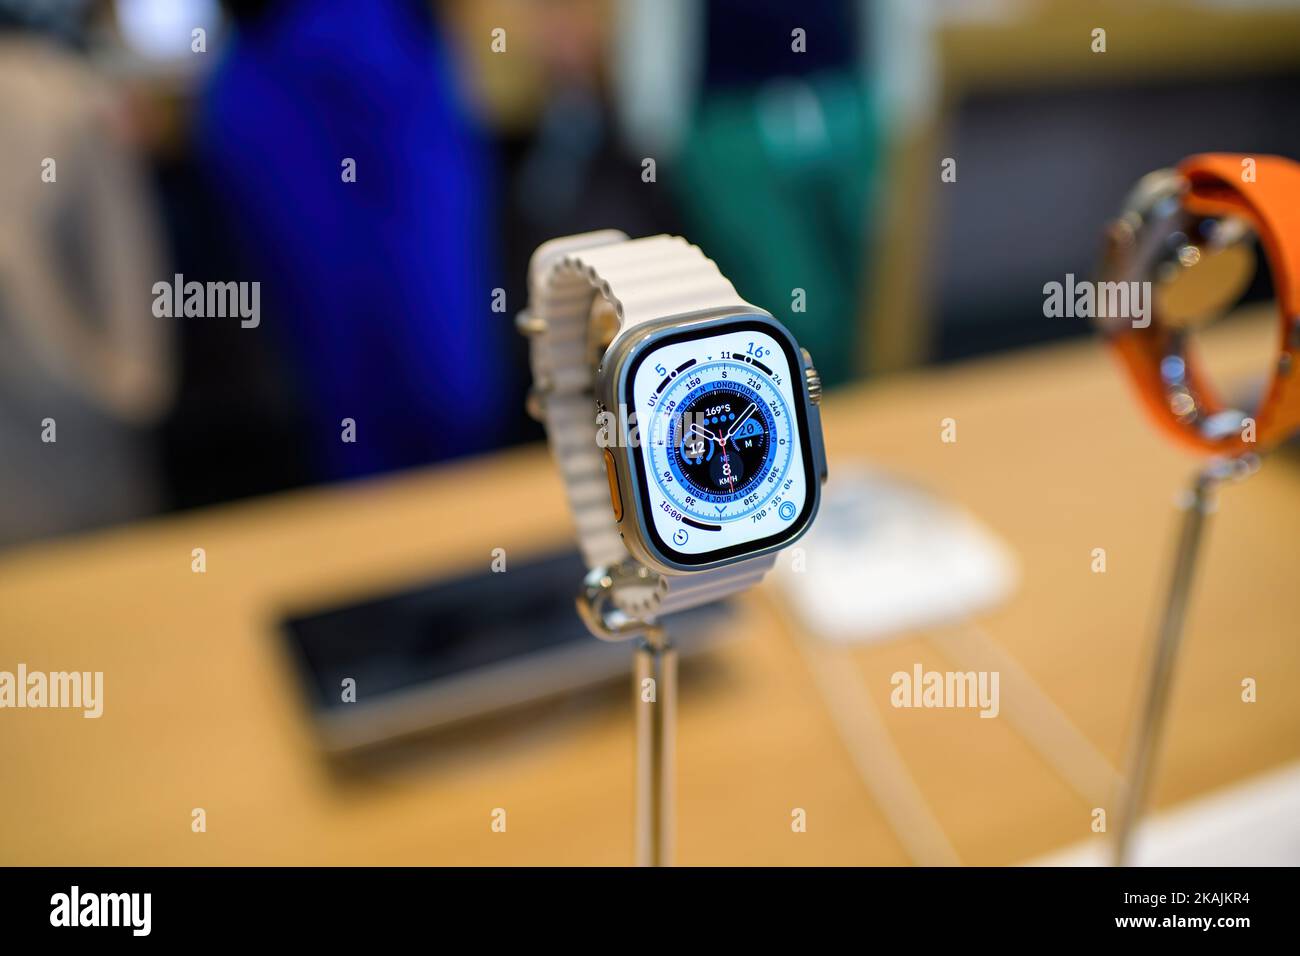 Paris, France - Oct 28, 2022: Presentation inside Apple store of the new wearable device Apple Watch Ultra - close-up of the new Wayfinder watch face Stock Photo